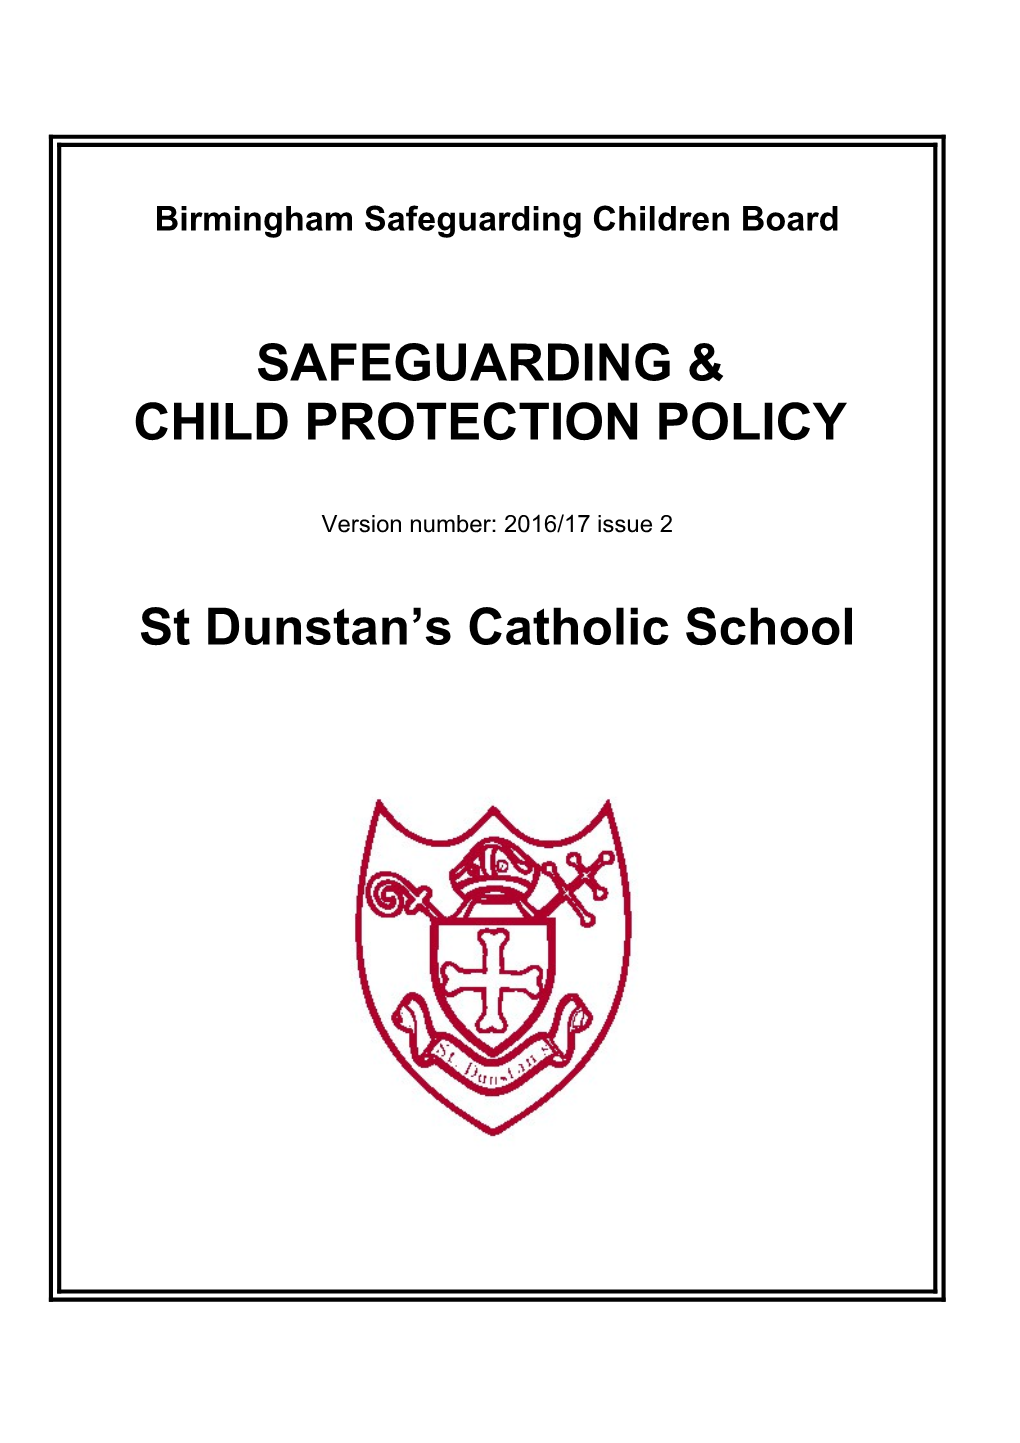 Safeguarding and Child Protection Policy for Schools and Education Services